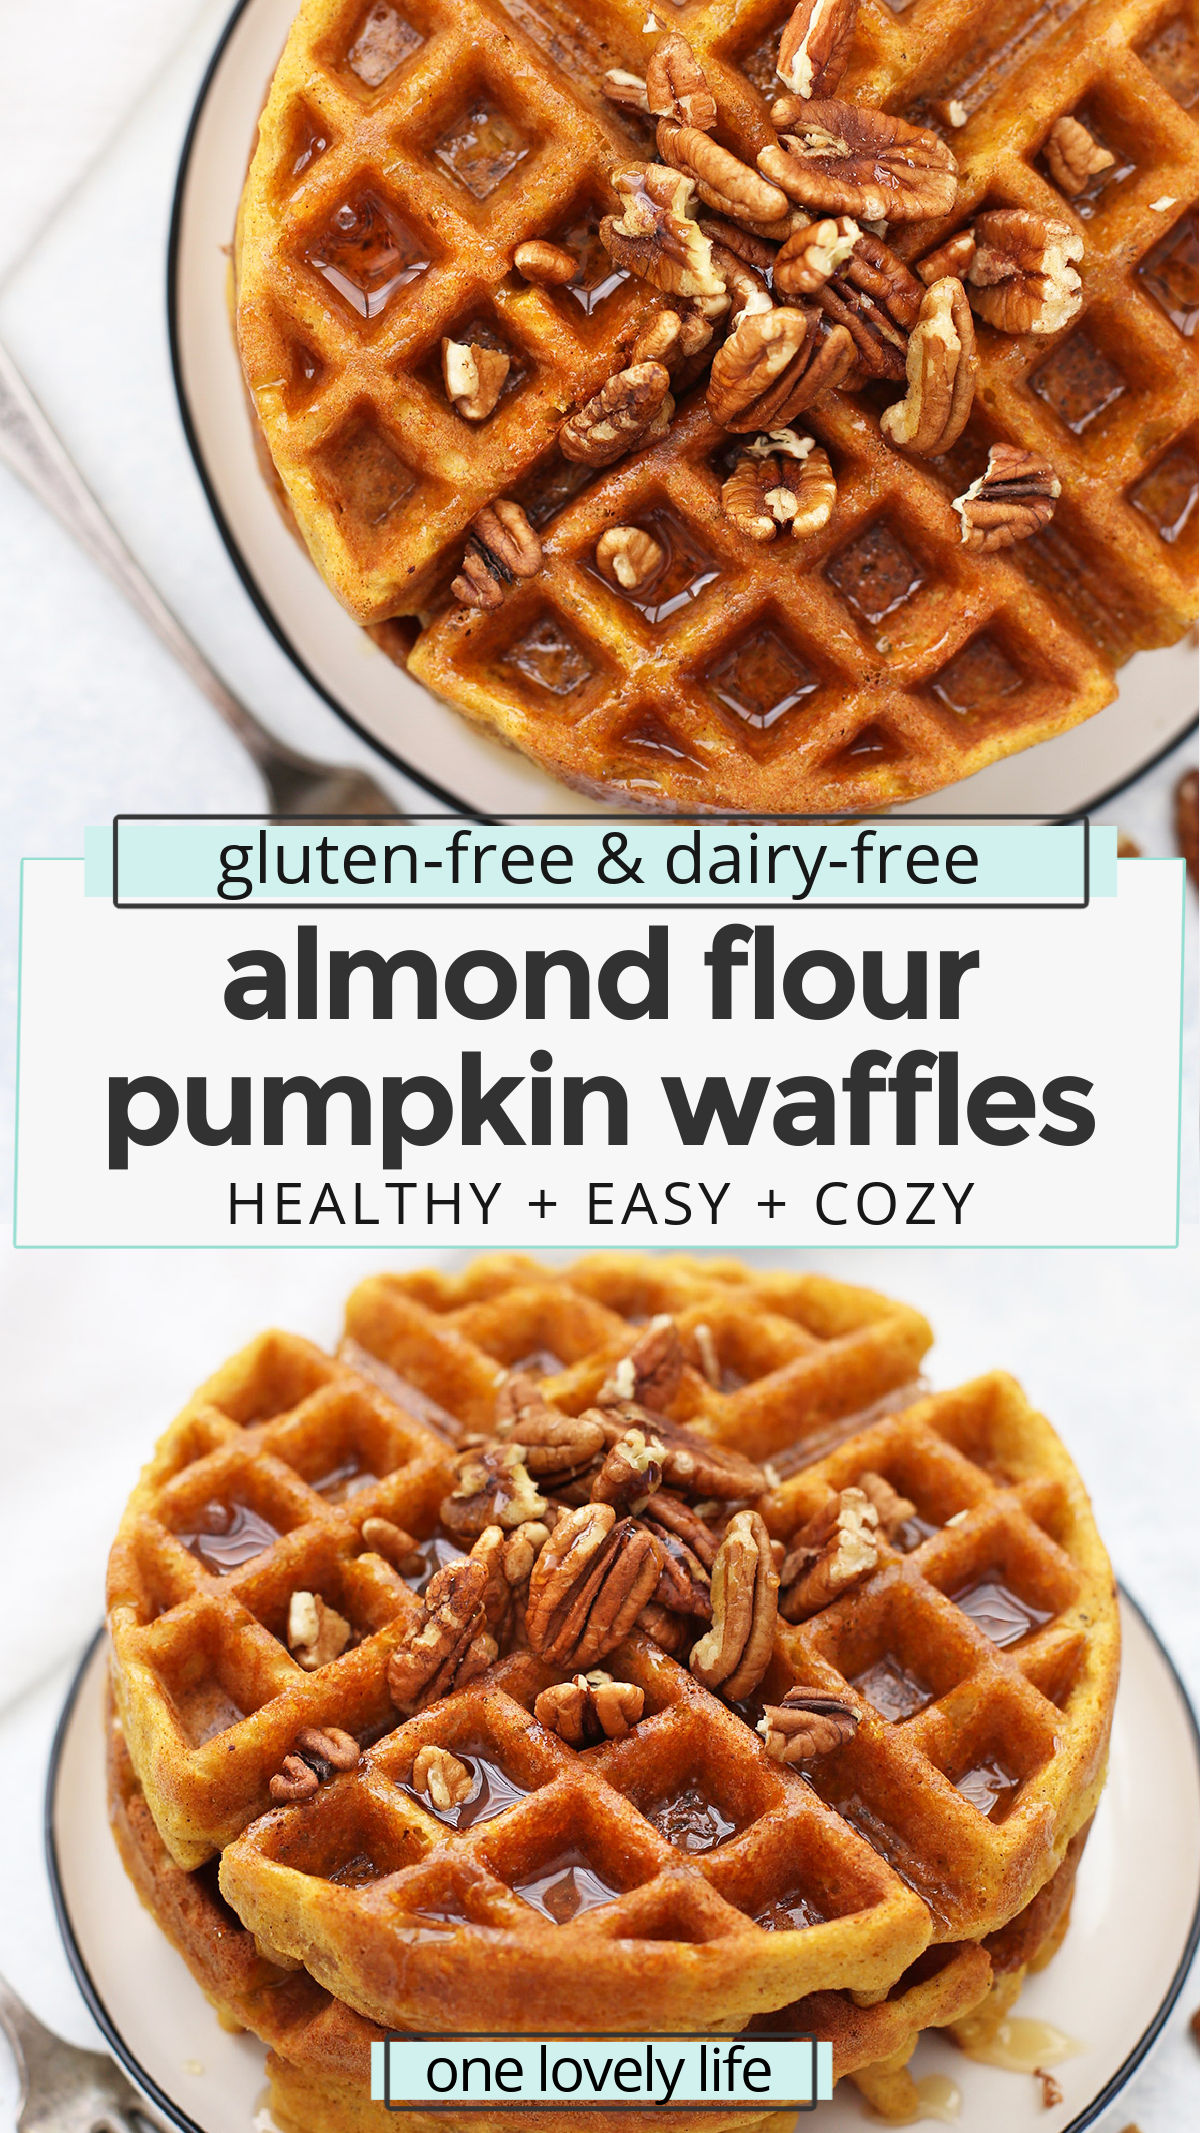 Almond Flour Pumpkin Waffles - These paleo pumpkin waffles are naturally gluten free, and completely delicious. Crispy on the outside and fluffy on the inside. // Paleo waffle recipe // almond flour waffle recipe // gluten free pumpkin waffle recipe // gluten free pumpkin waffles recipe // paleo pumpkin waffles recipe // almond flour waffles recipe // pumpkin waffles recipe // paleo breakfast // paleo pumpkin recipes // gluten free breakfast // healthy pumpkin waffles #almondflour #waffles